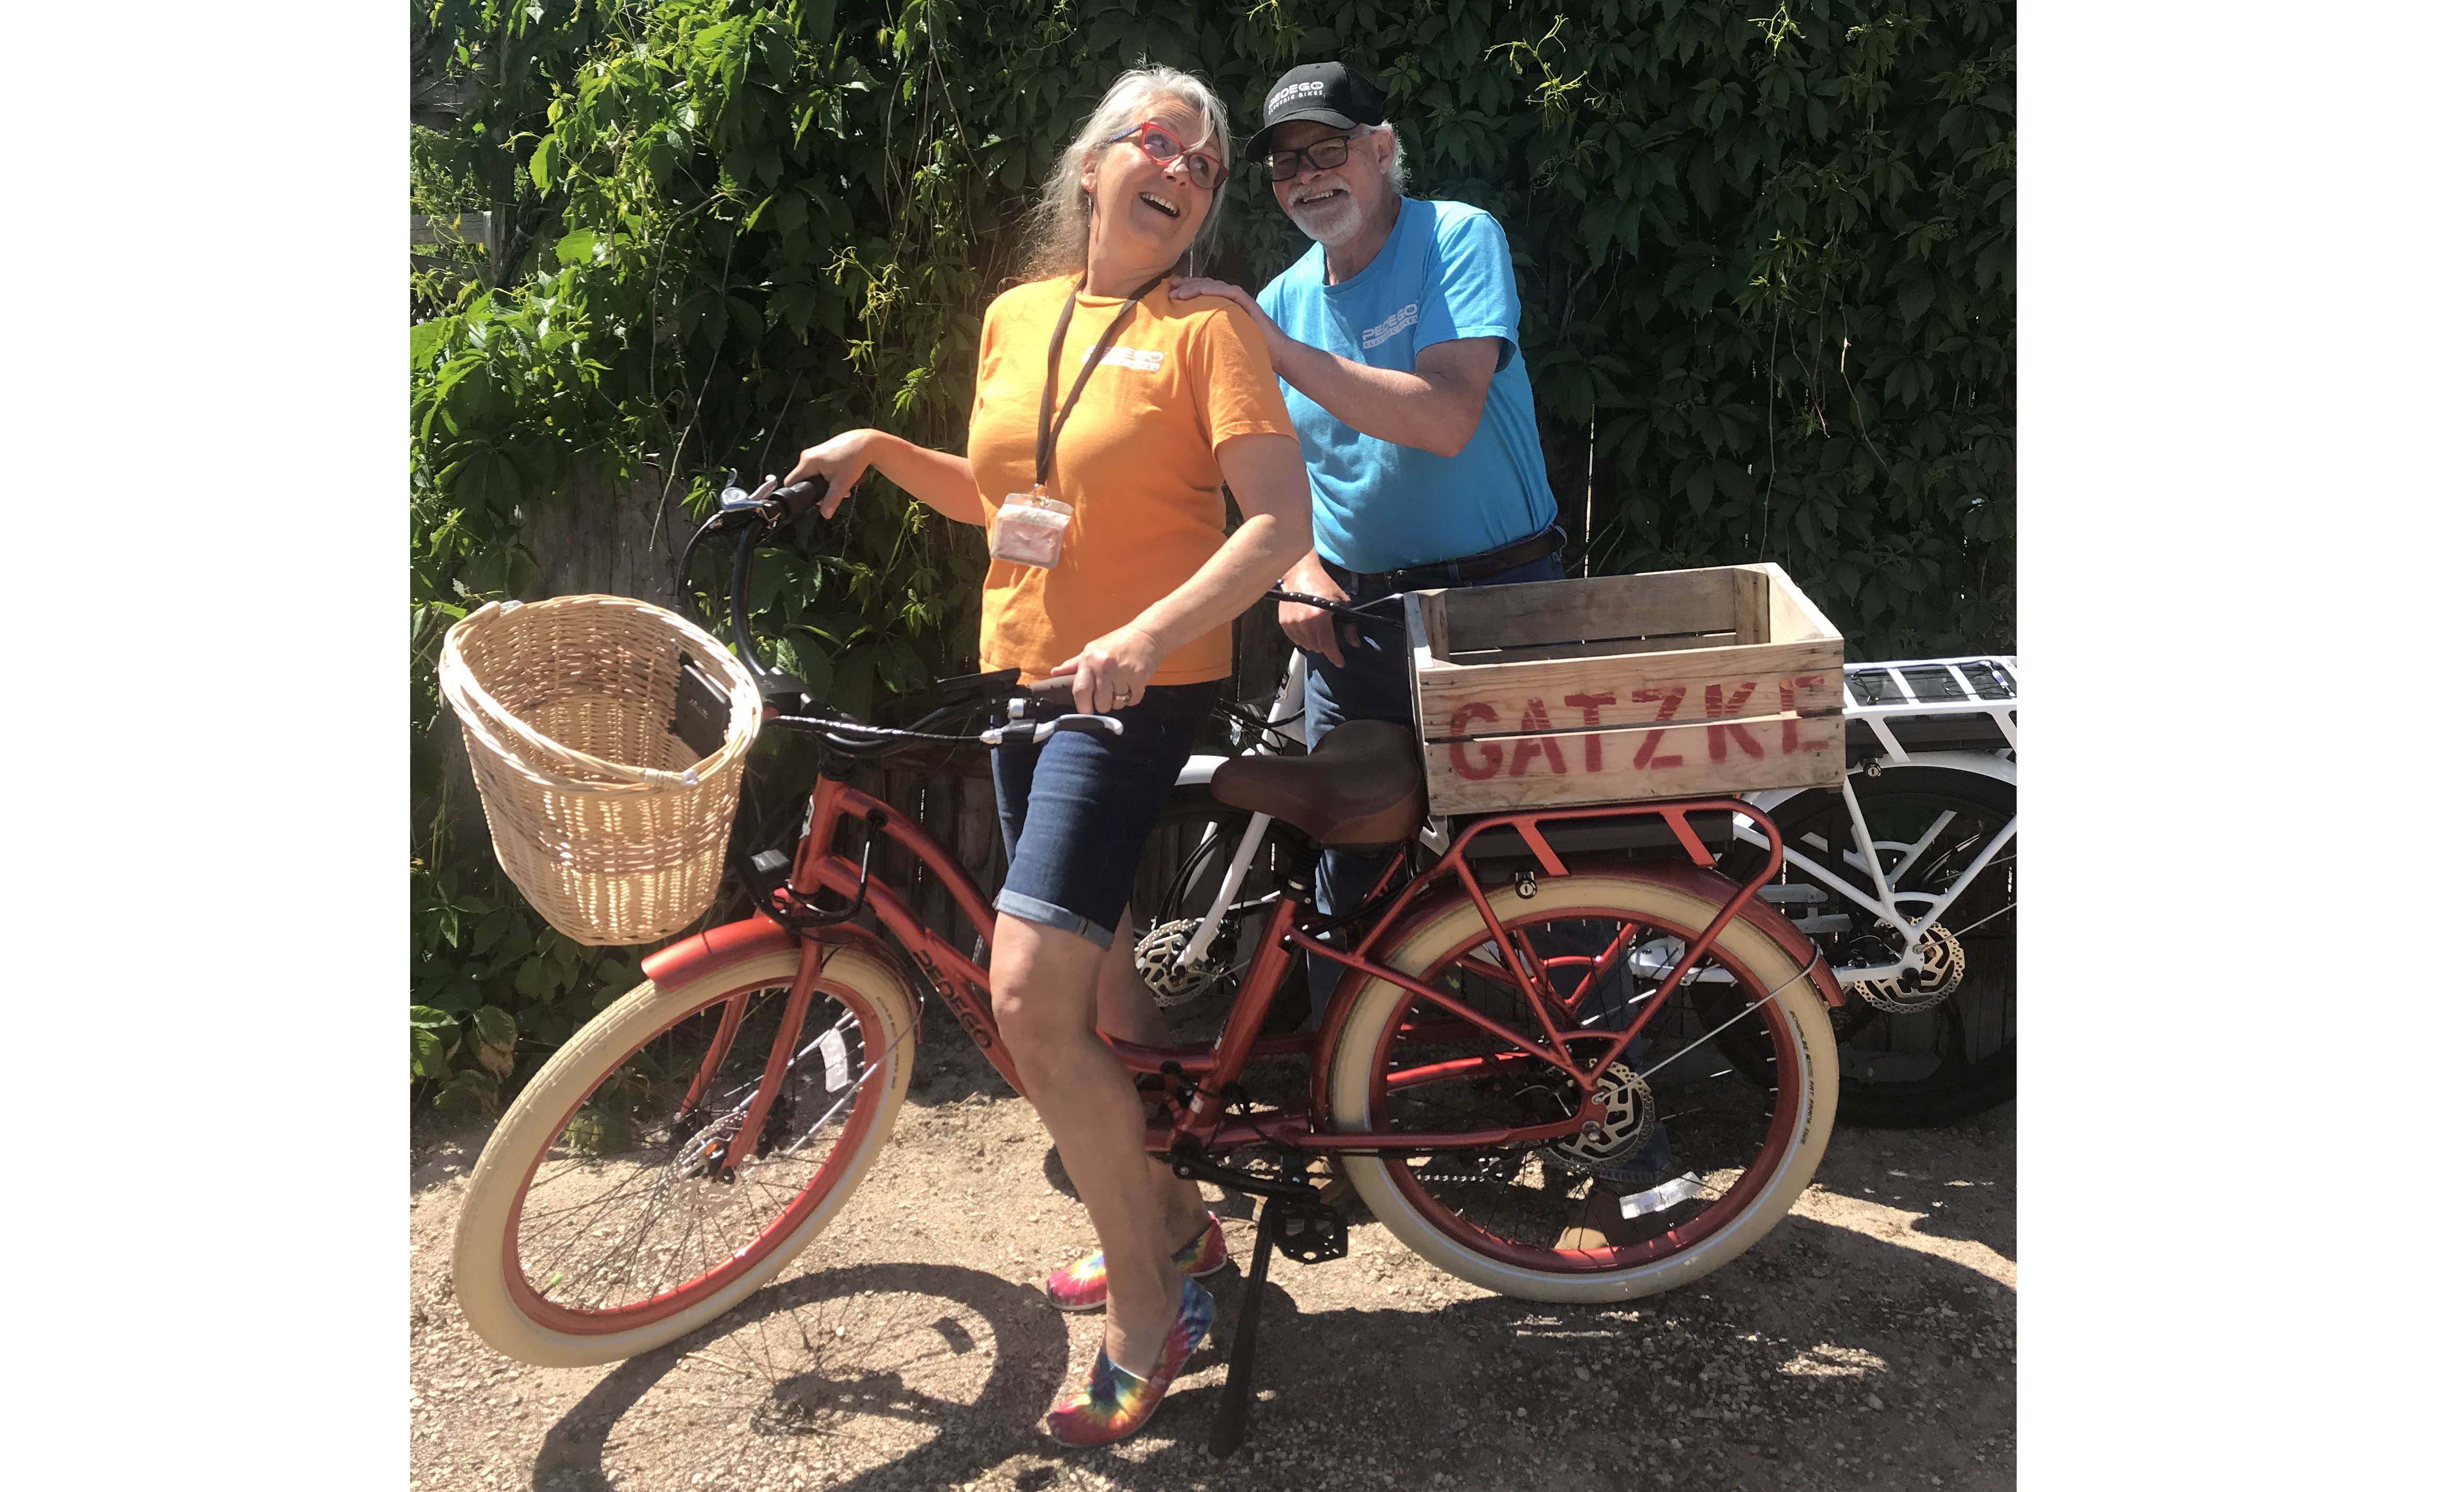 Pedego Oyama owners Murray and Sheila Fraser take a break from their electric bike riding.